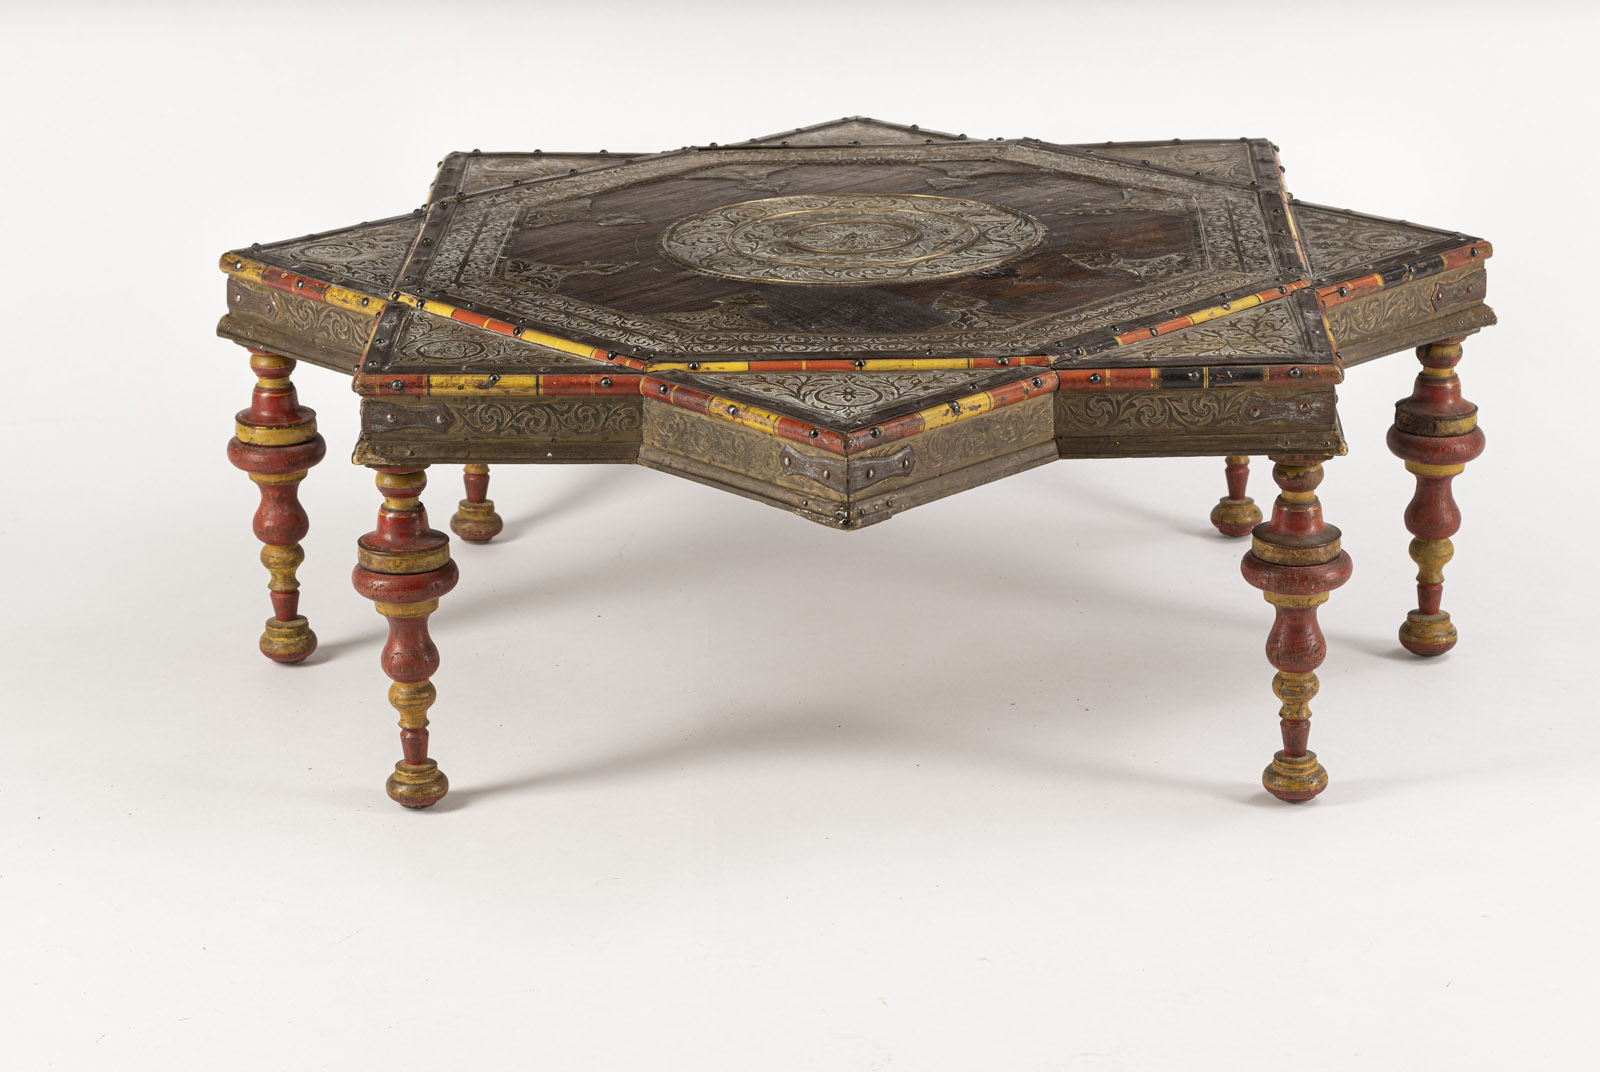 A STAR-SHAPED METAL EMBELLISHED WOOD TABLE - Image 2 of 8